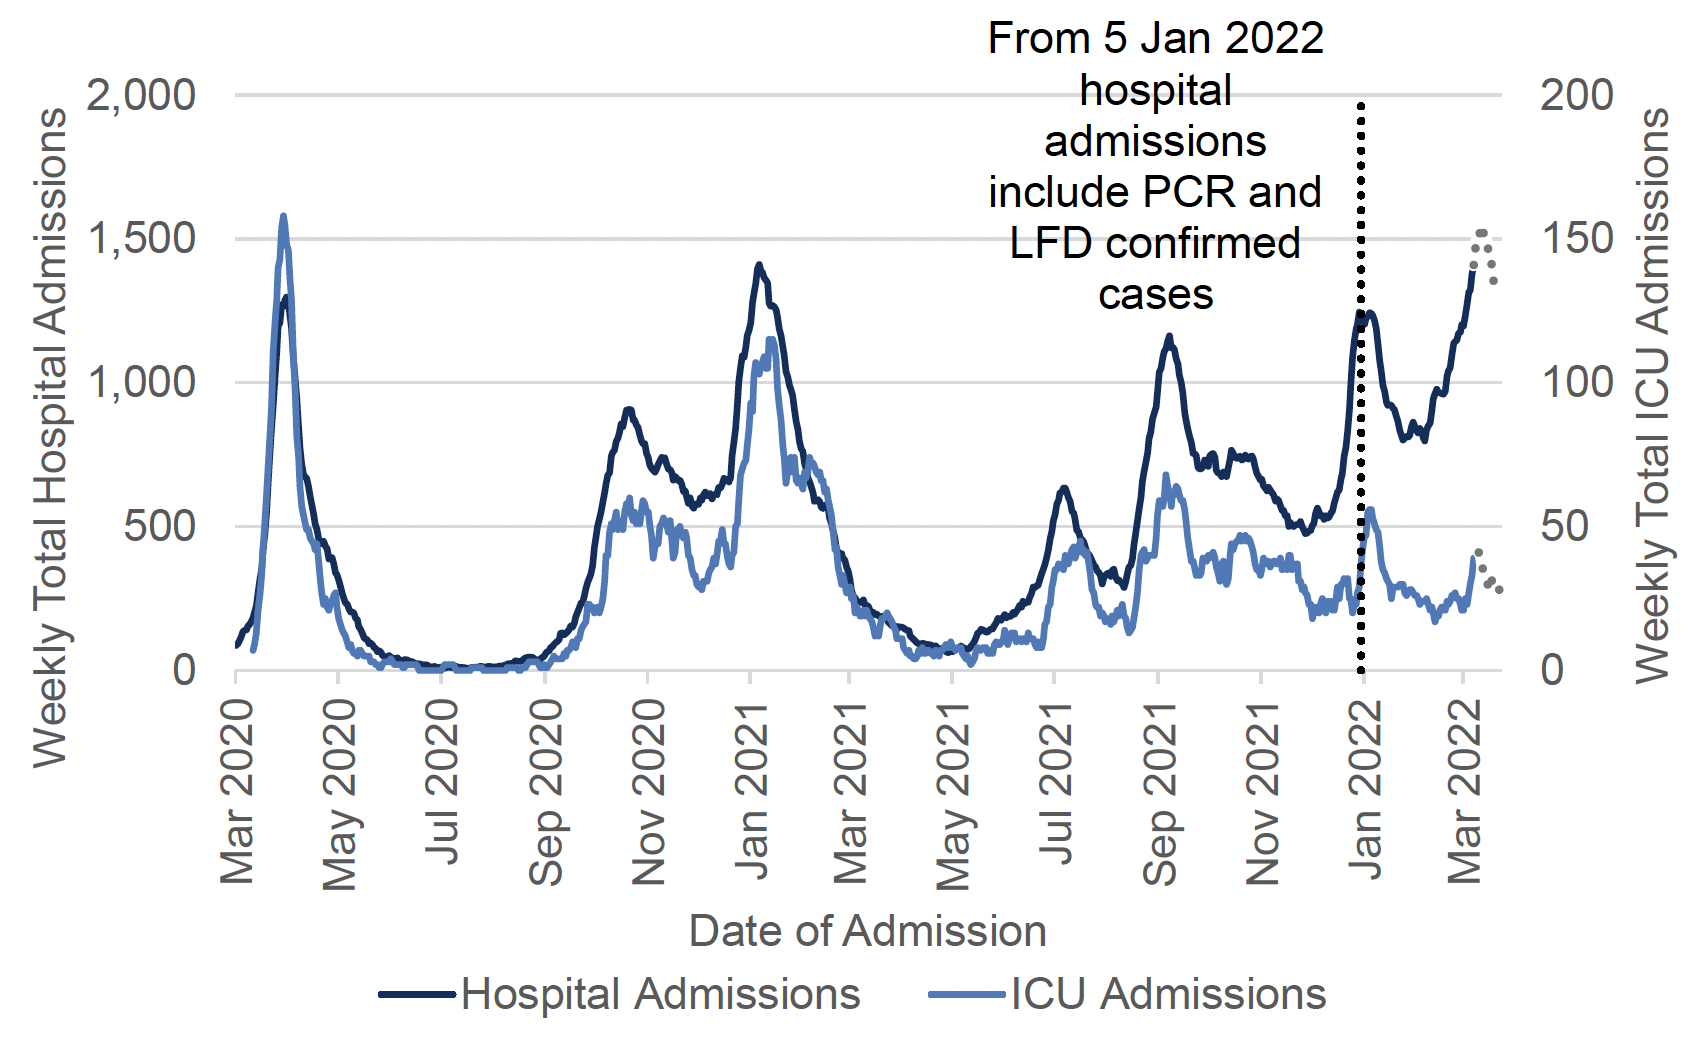 A line chart showing the total weekly number of hospital admissions with recently confirmed Covid-19 from March 2020 to 2022, against the left axis, and the weekly number of ICU admissions against the right axis. Both hospital and ICU admissions peaked in March 2020, October 2020, January 2021, July 2021, September 2021, and January 2022, with an increasing trend seen in March 2022. Last two weeks’ trend line is greyed out due to data uncertainty. The chart has a note that says: “from 5 January 2022 hospital admissions include PCR and LFD confirmed cases”. Before 5 January 2022, hospital admissions include only PCR confirmed cases.